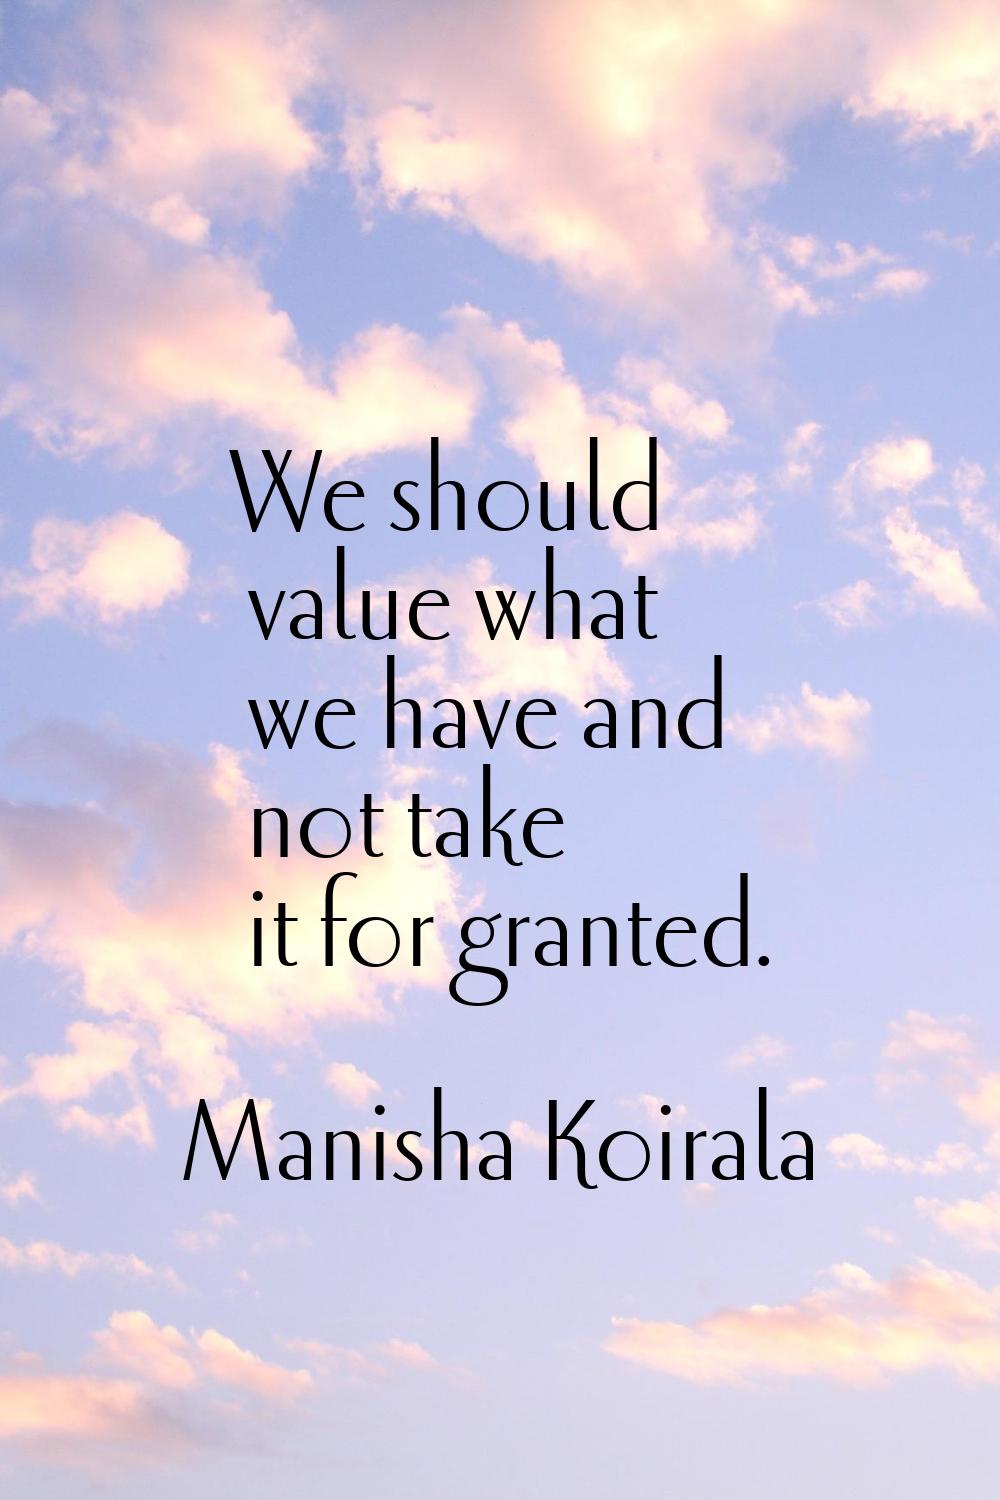 We should value what we have and not take it for granted.